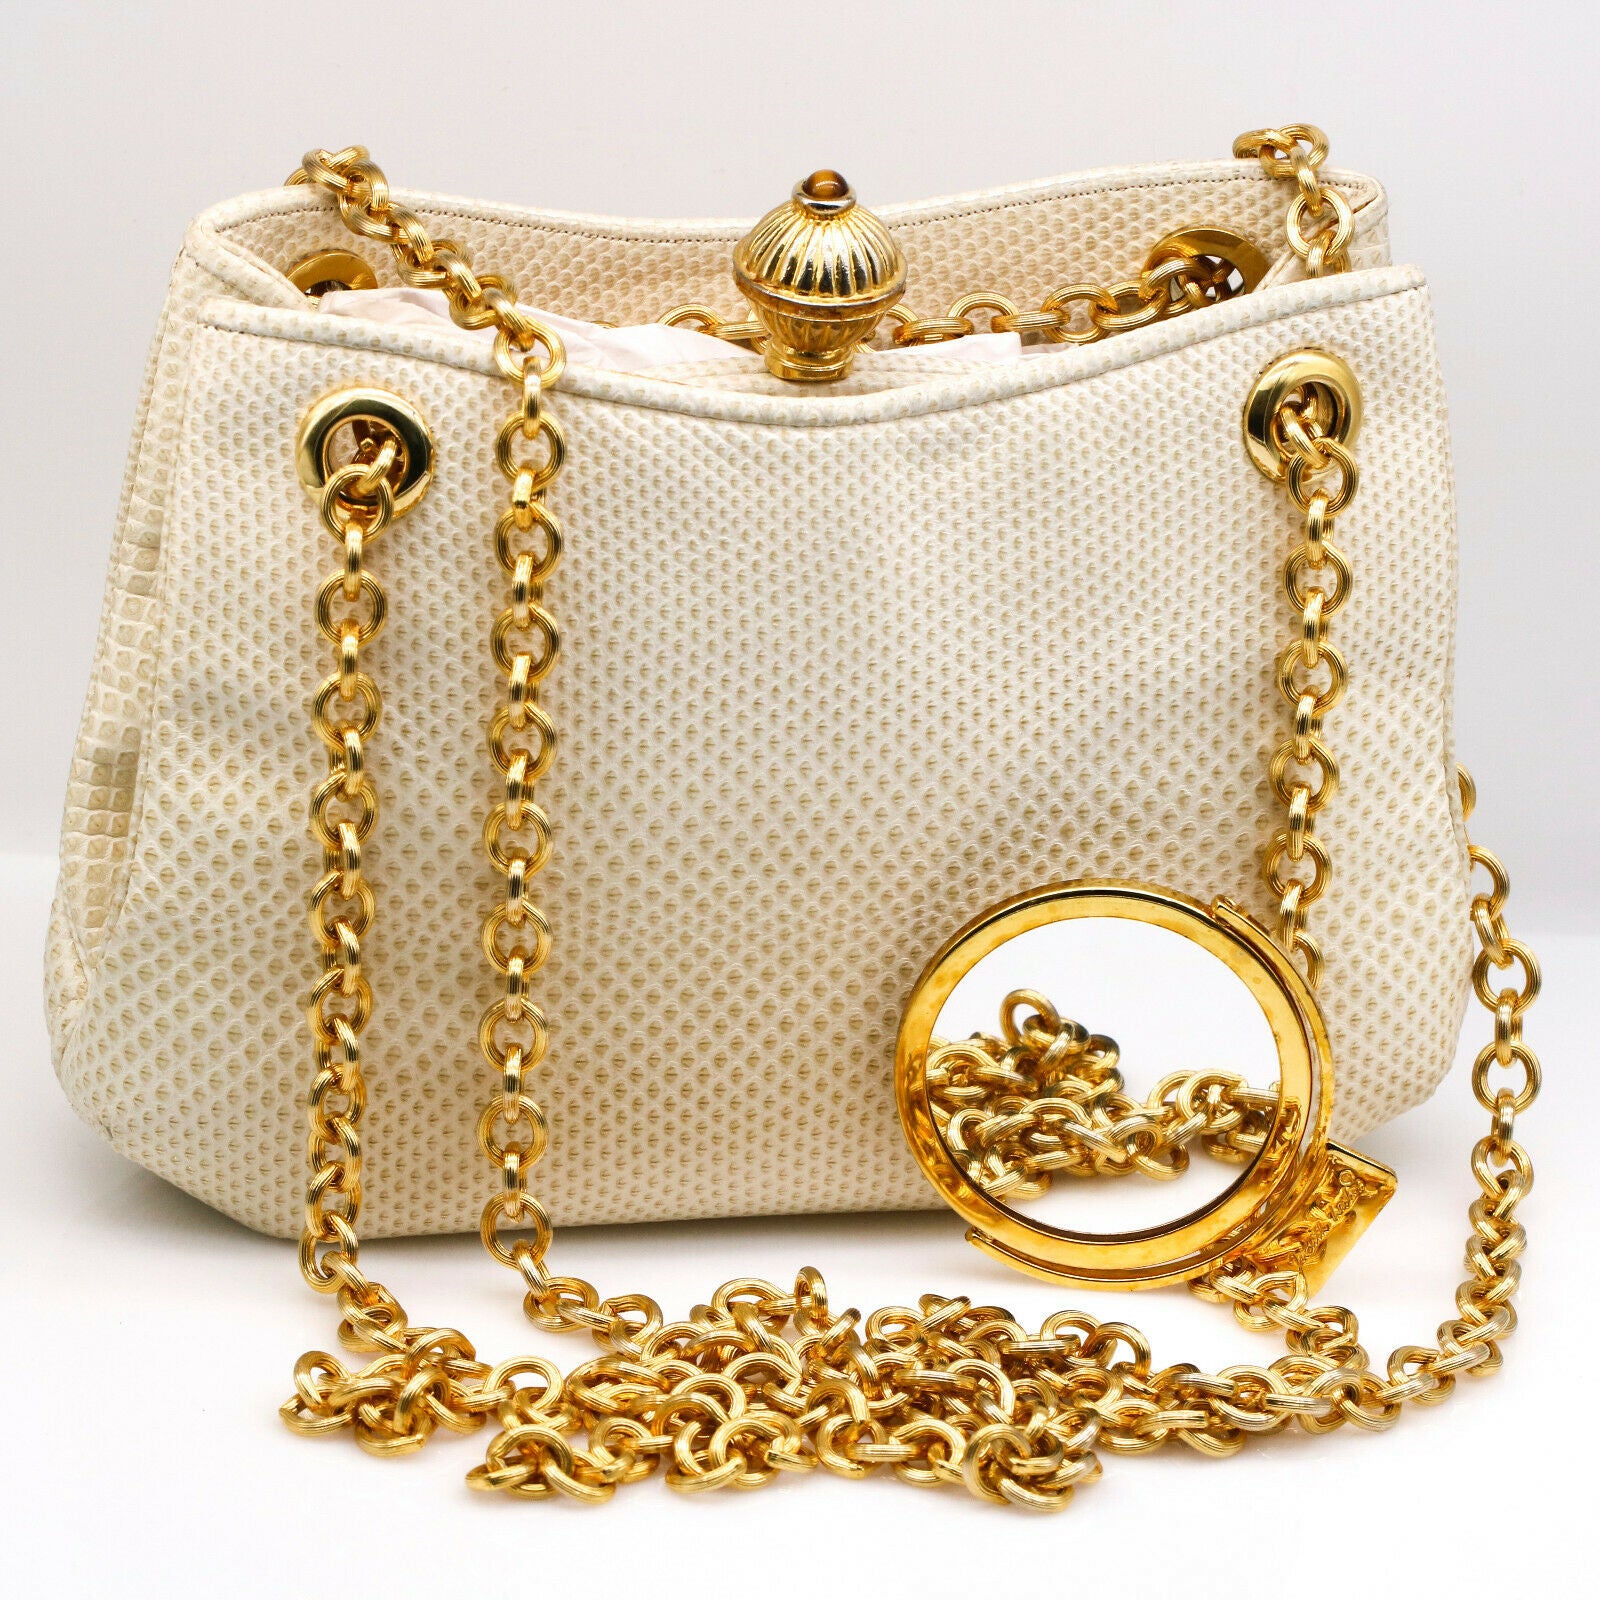 Karyme Gold Chain Strap Pouch Shoulder Bag in White